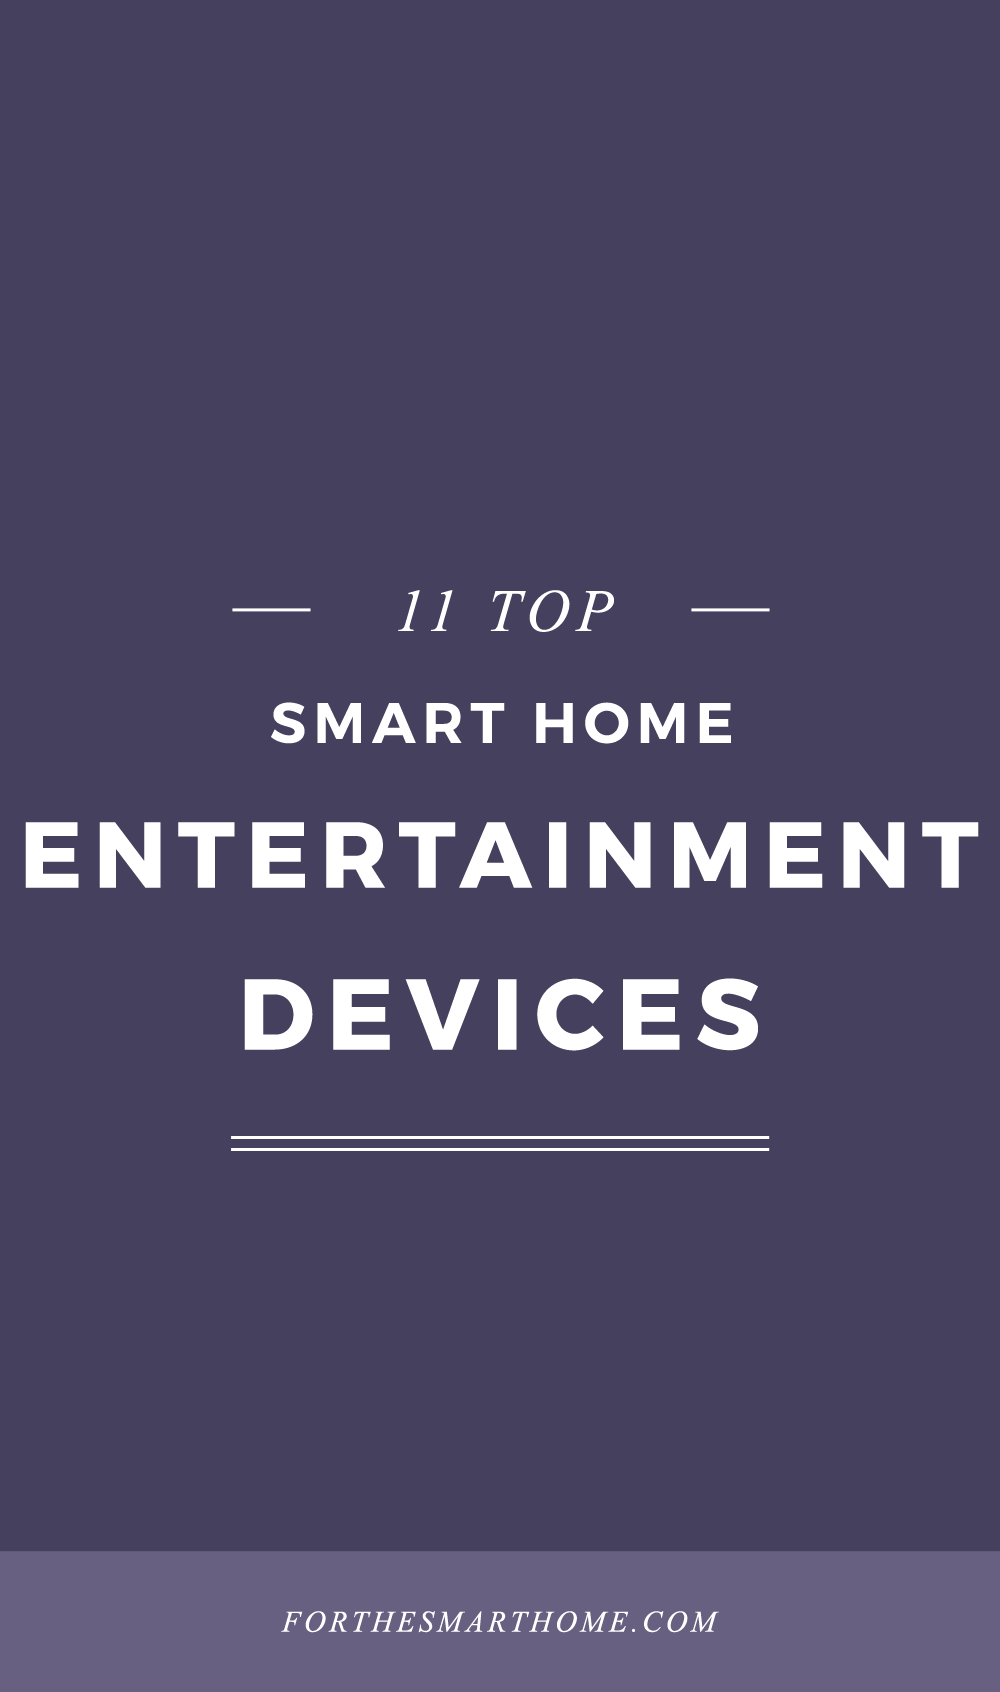 Brand of Entertainment Devices Logo - Top Smart Home Entertainment Devices | For the Smart Home | Pinterest